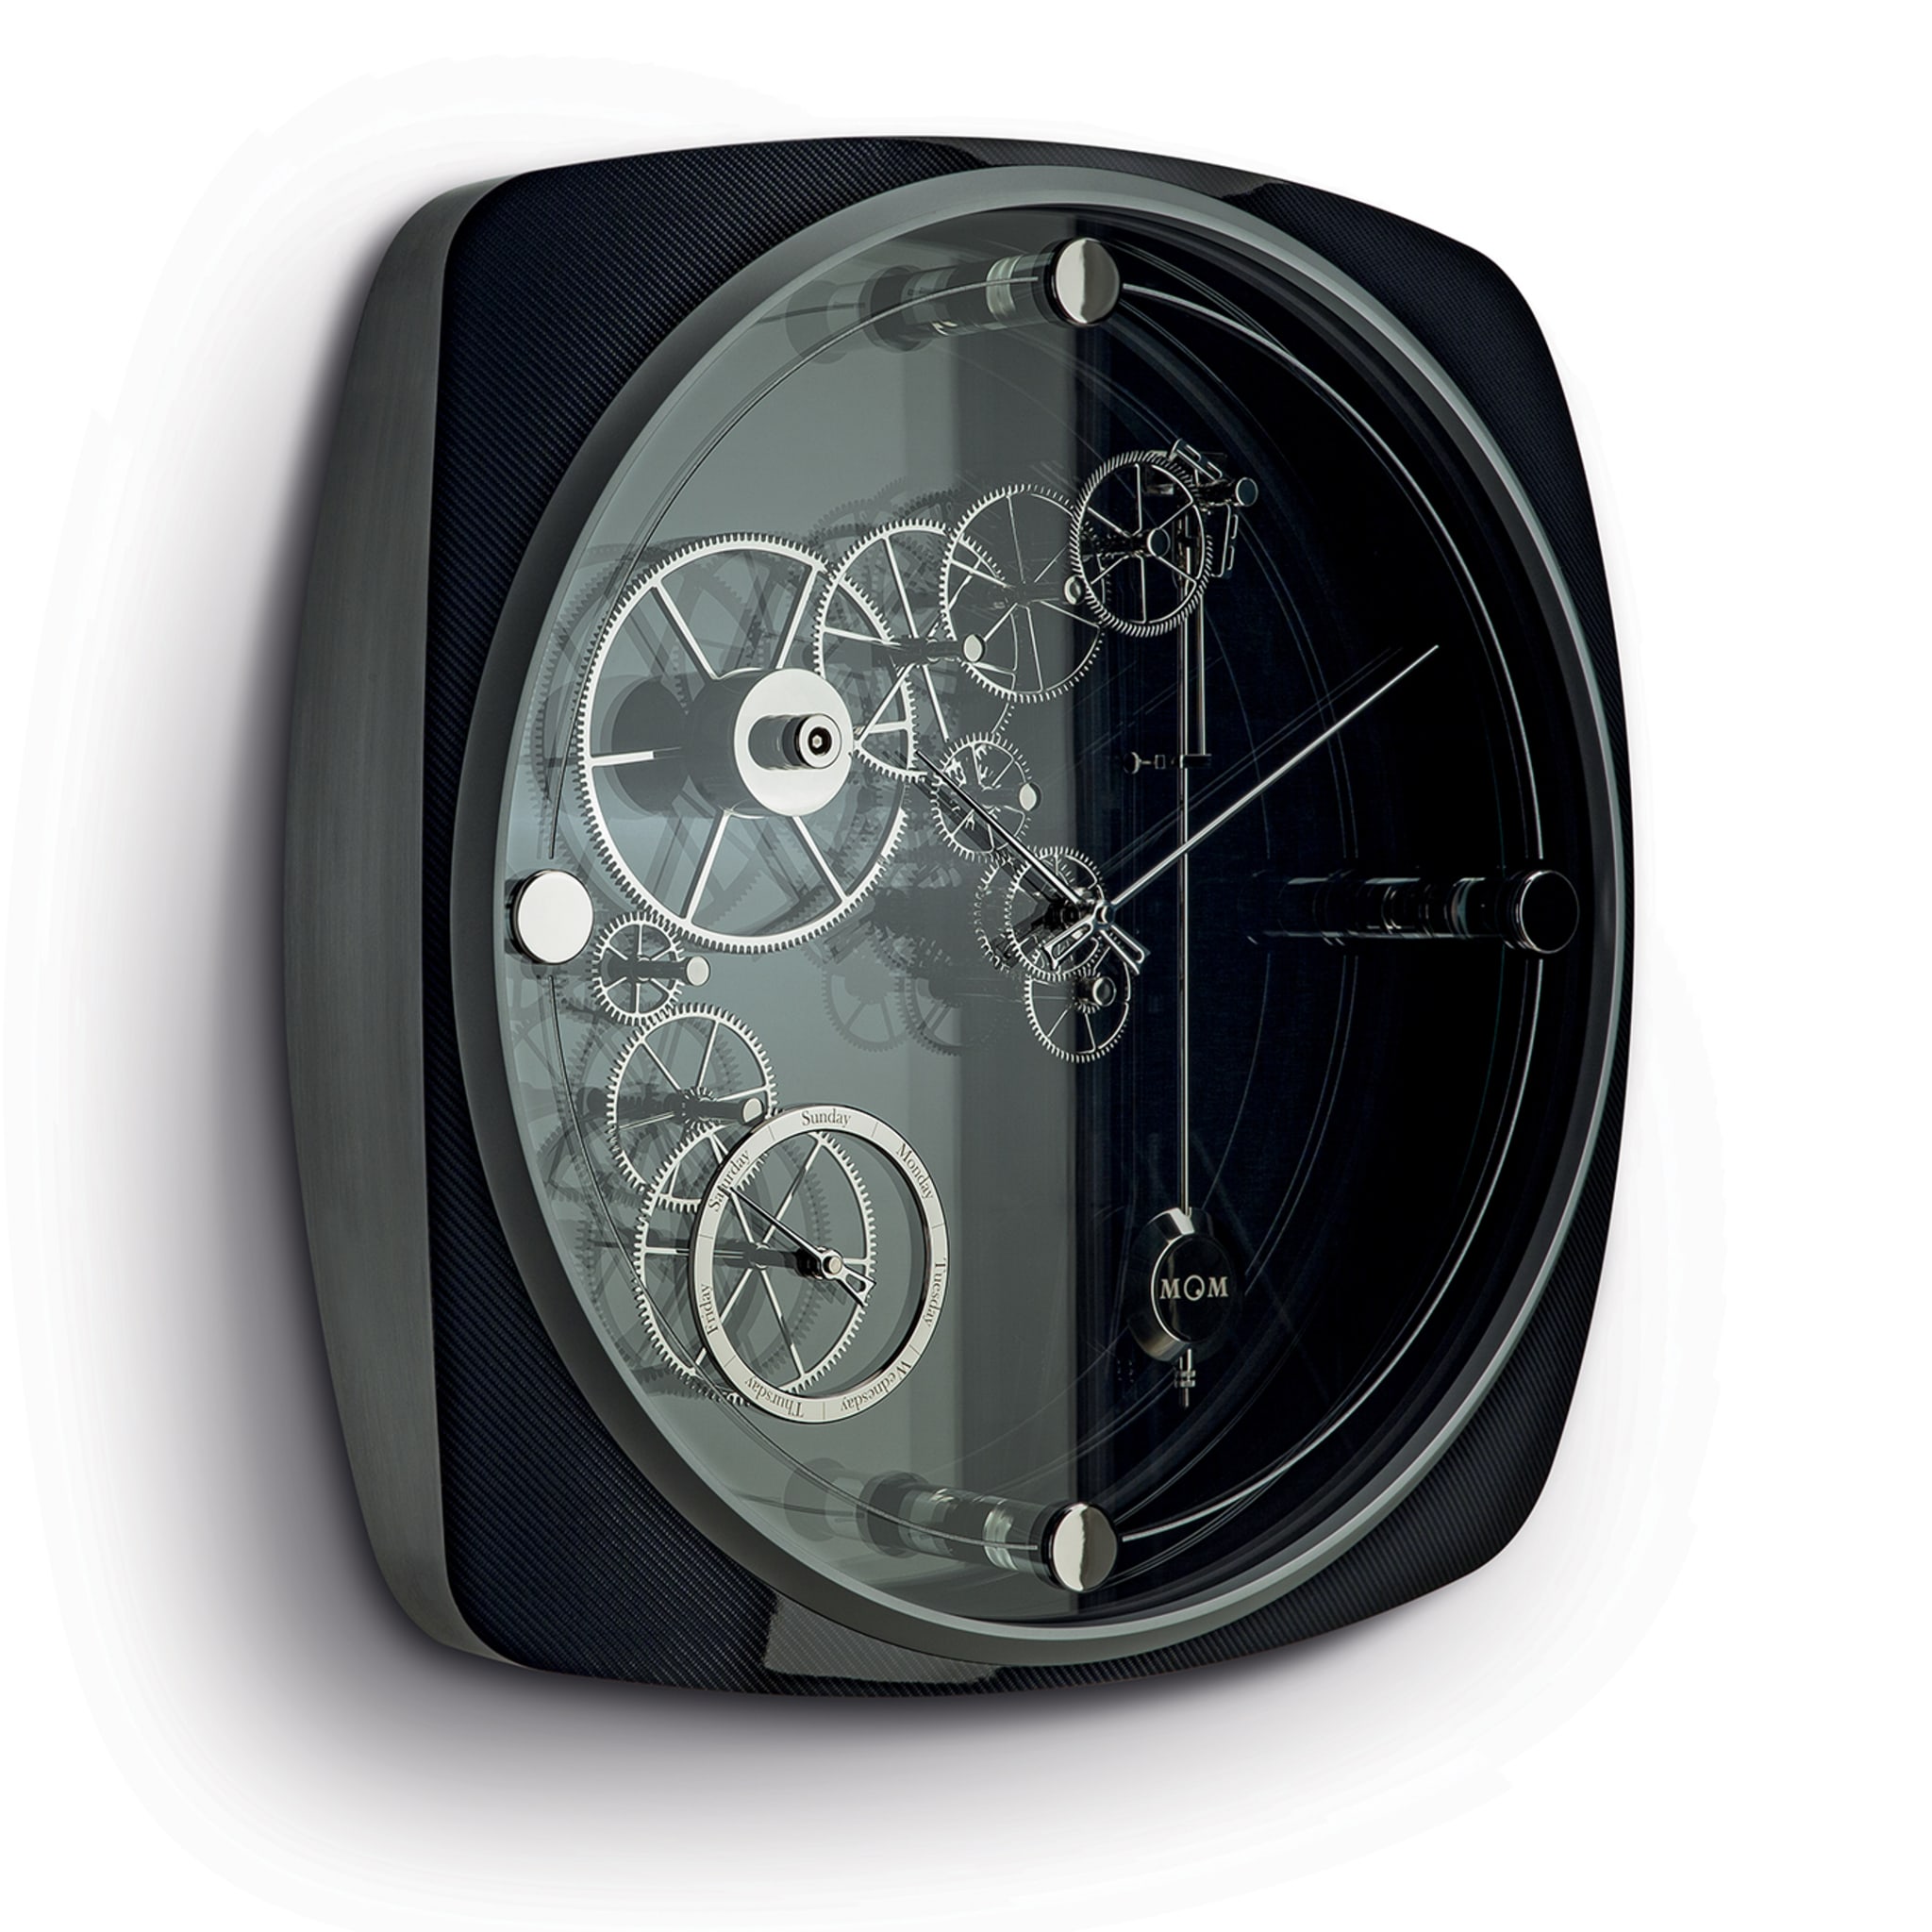 Indianapolis Speed Twin Clock - Alternative view 1